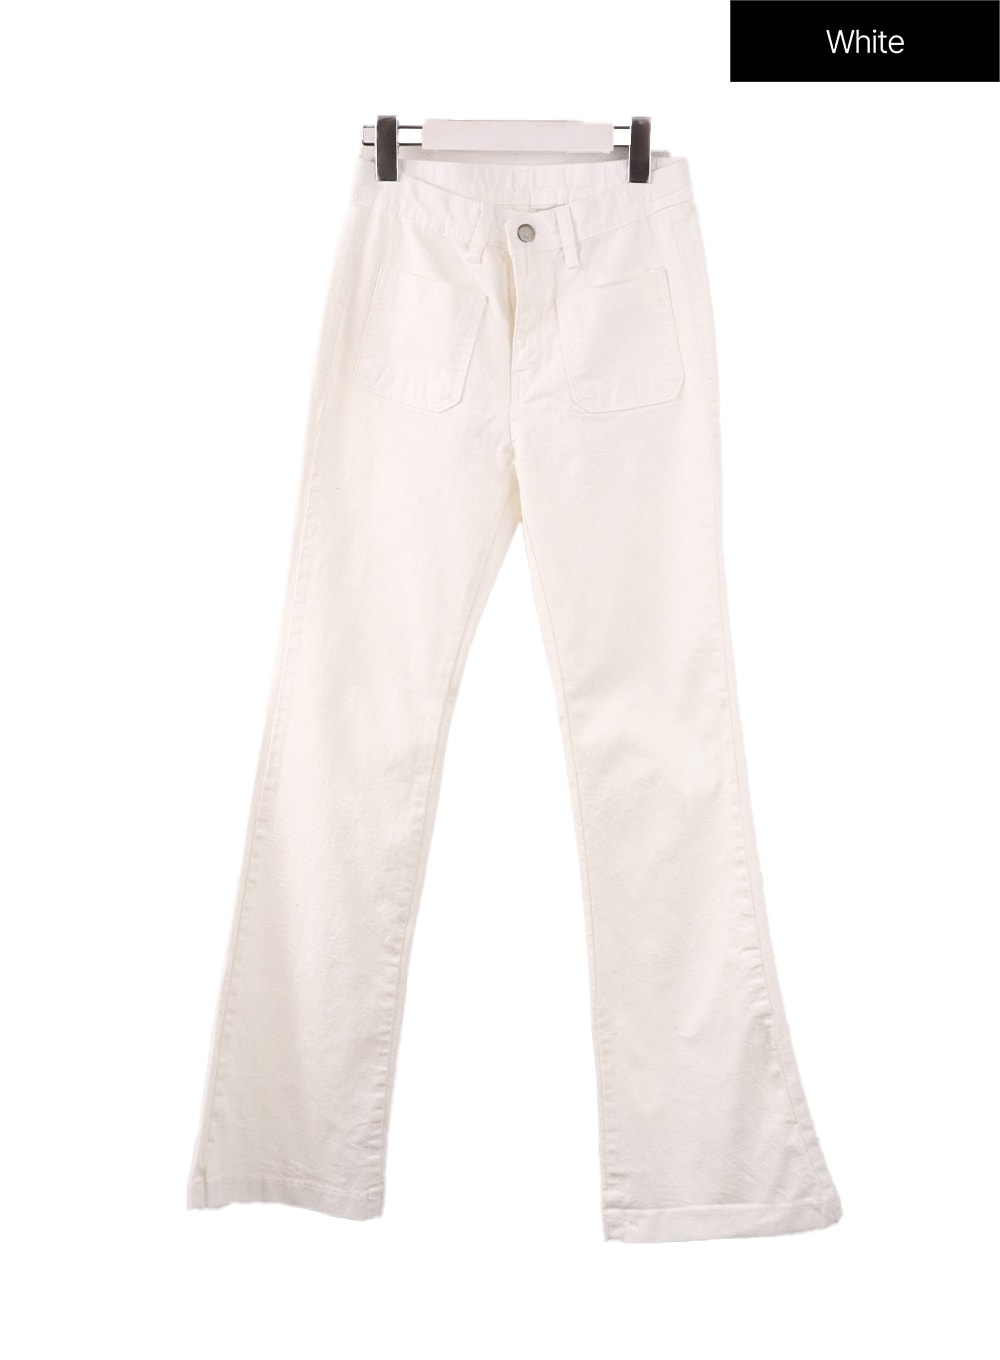 mid-waist-button-flared-trousers-if408 / White